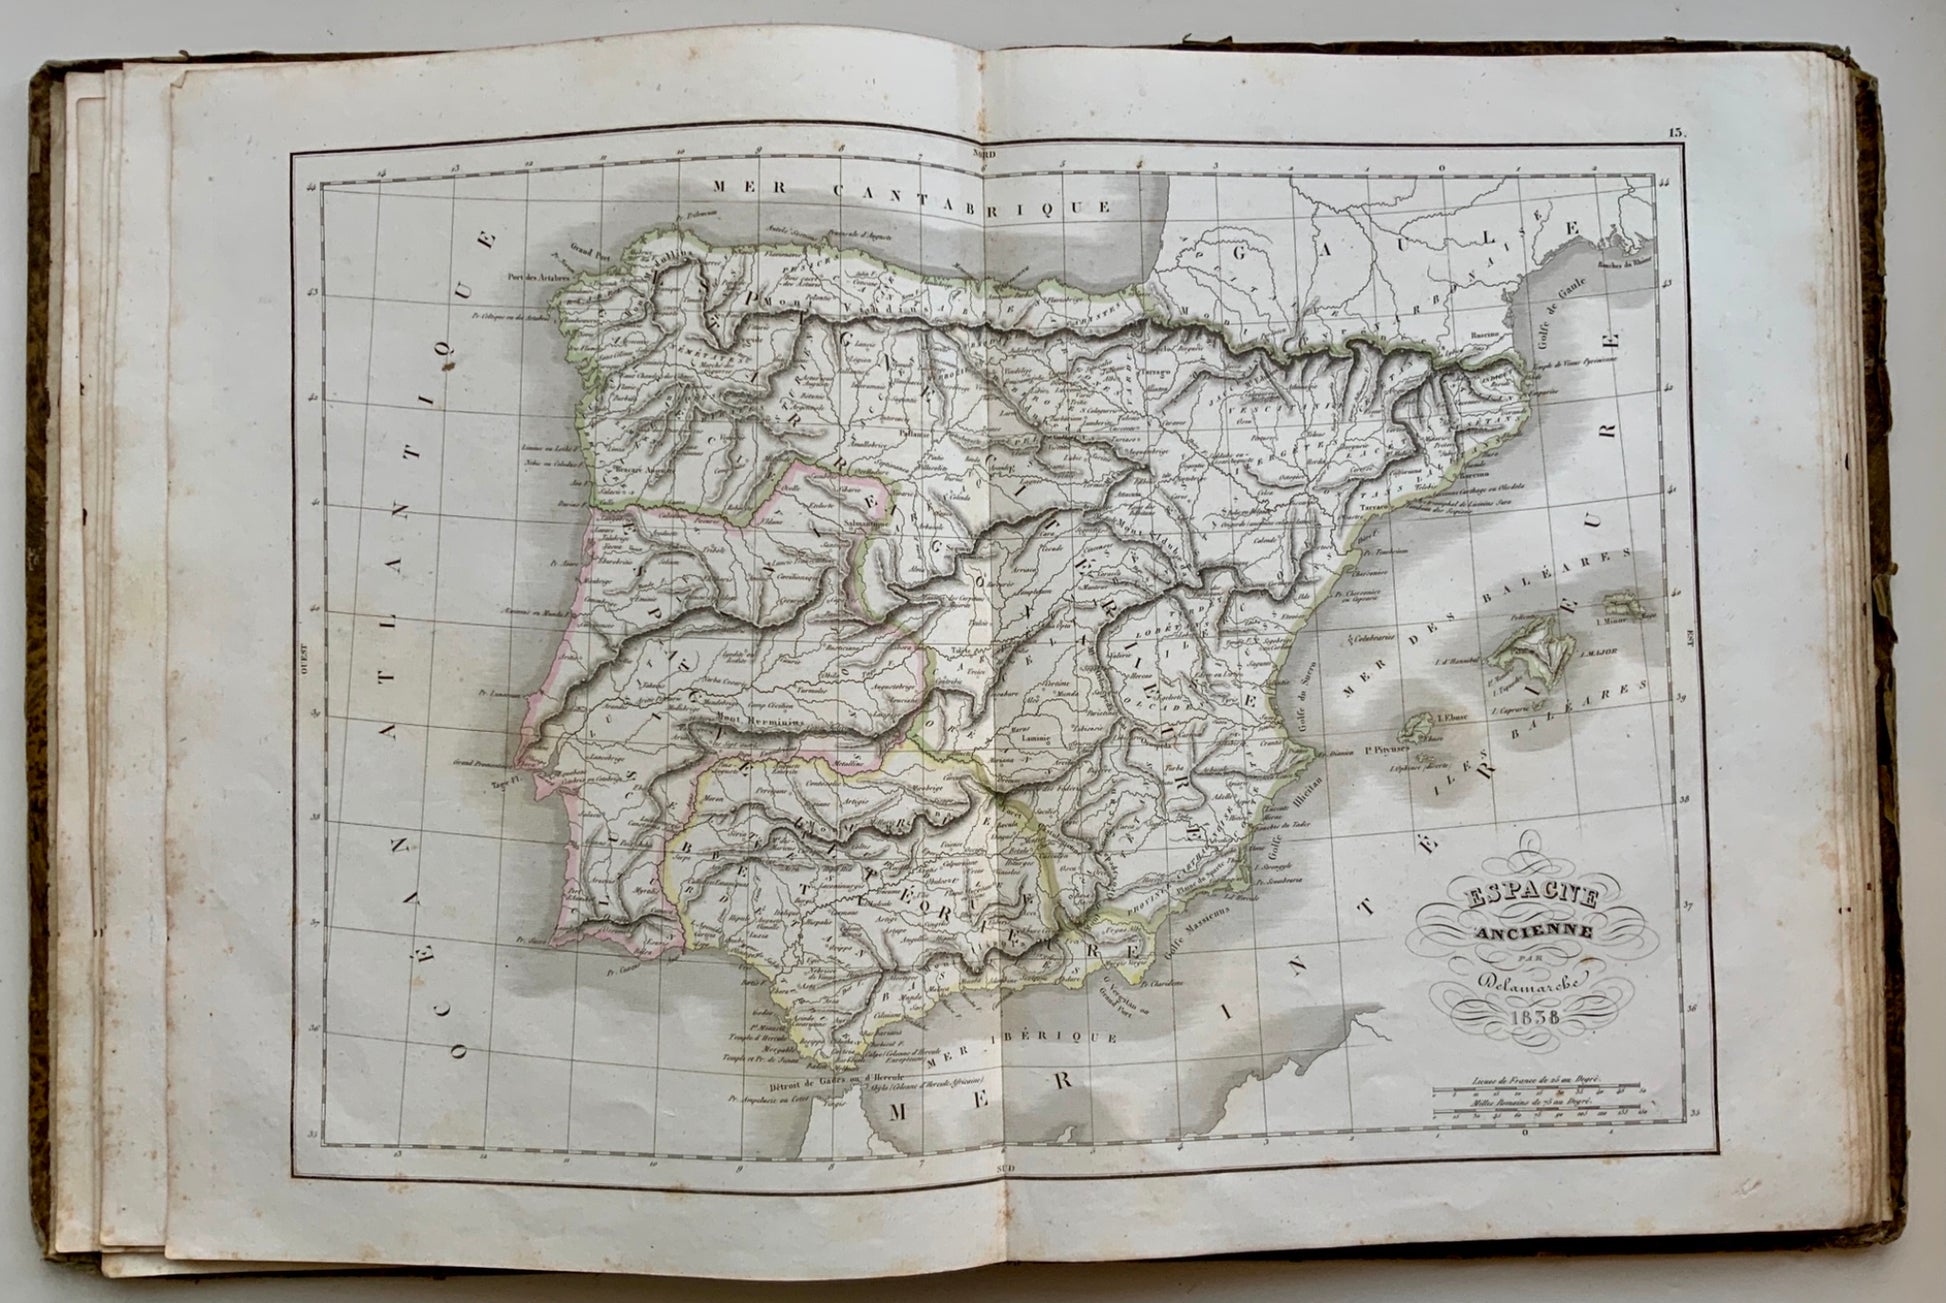 1846 folio Delamarche Atlas of the World - 37 double page and hand coloured map